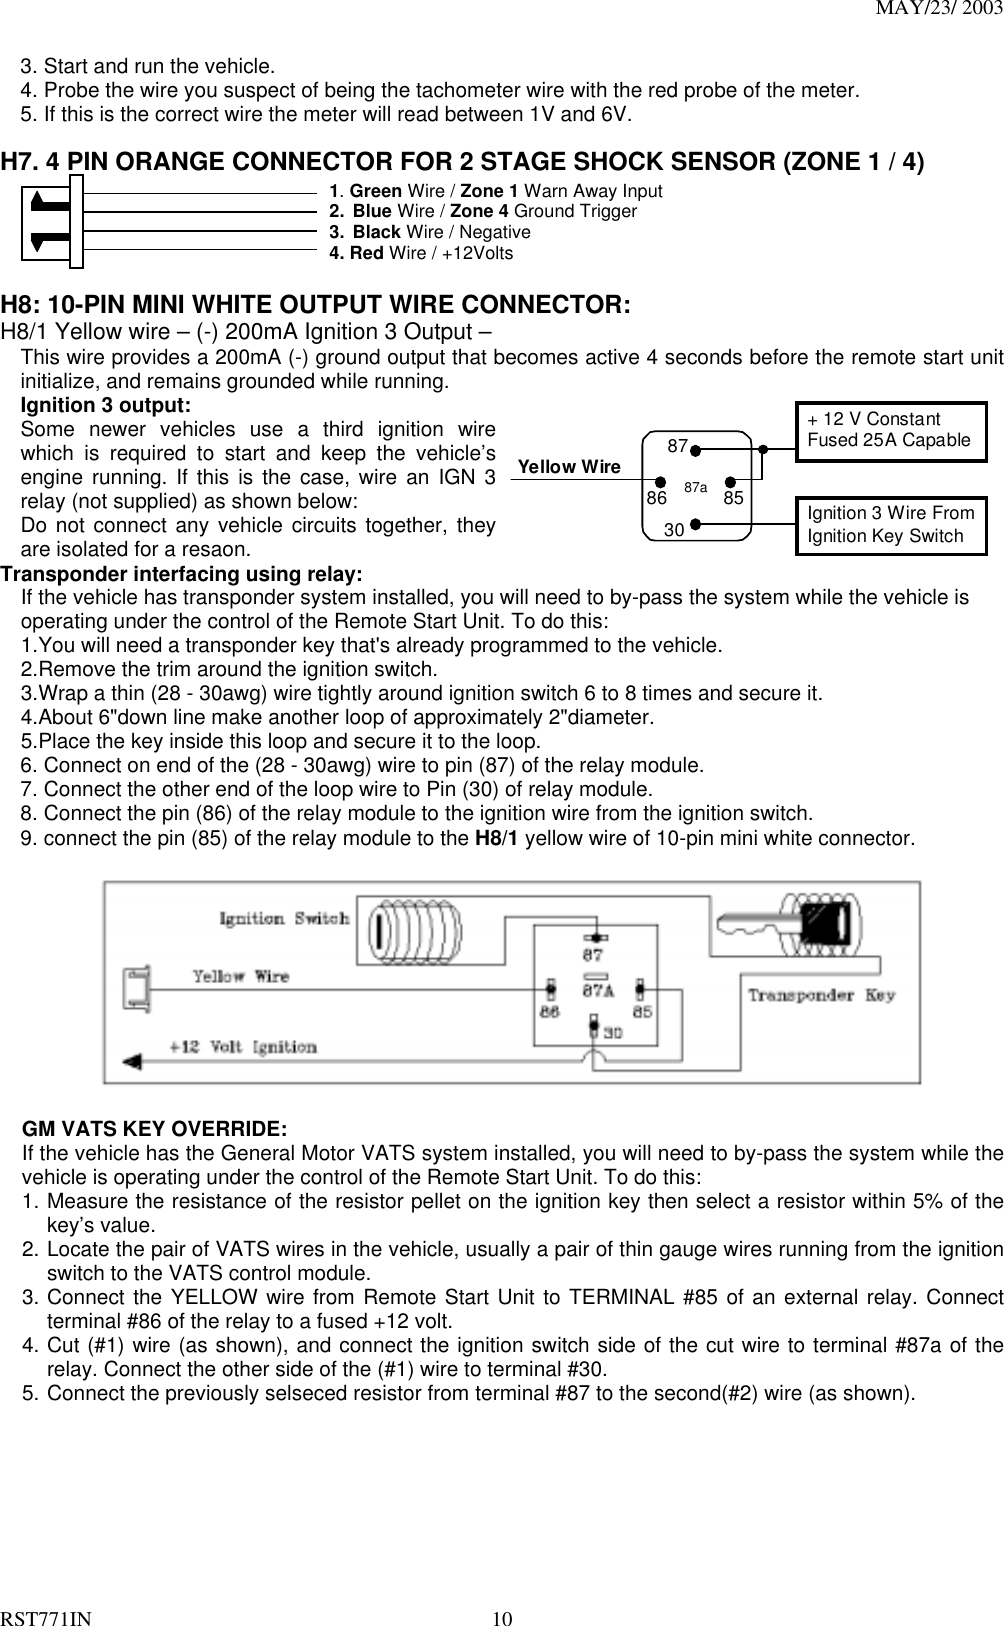 MAY/23/ 2003 RST771IN  10 3. Start and run the vehicle. 4. Probe the wire you suspect of being the tachometer wire with the red probe of the meter. 5. If this is the correct wire the meter will read between 1V and 6V.  H7. 4 PIN ORANGE CONNECTOR FOR 2 STAGE SHOCK SENSOR (ZONE 1 / 4)                      1. Green Wire / Zone 1 Warn Away Input 2. Blue Wire / Zone 4 Ground Trigger 3. Black Wire / Negative 4. Red Wire / +12Volts    H8: 10-PIN MINI WHITE OUTPUT WIRE CONNECTOR: H8/1 Yellow wire – (-) 200mA Ignition 3 Output – This wire provides a 200mA (-) ground output that becomes active 4 seconds before the remote start unit initialize, and remains grounded while running.   Ignition 3 output: Some newer vehicles use a third ignition wire which is required to start and keep the vehicle’s engine running. If this is the case, wire an IGN 3 relay (not supplied) as shown below: Do not connect any vehicle circuits together, they are isolated for a resaon.   Yellow Wire87aIgnition 3 Wire FromIgnition Key Switch+ 12 V ConstantFused 25A Capable30858687 Transponder interfacing using relay:     If the vehicle has transponder system installed, you will need to by-pass the system while the vehicle is     operating under the control of the Remote Start Unit. To do this:     1.You will need a transponder key that&apos;s already programmed to the vehicle.     2.Remove the trim around the ignition switch.     3.Wrap a thin (28 - 30awg) wire tightly around ignition switch 6 to 8 times and secure it.     4.About 6&quot;down line make another loop of approximately 2&quot;diameter.     5.Place the key inside this loop and secure it to the loop. 6. Connect on end of the (28 - 30awg) wire to pin (87) of the relay module. 7. Connect the other end of the loop wire to Pin (30) of relay module. 8. Connect the pin (86) of the relay module to the ignition wire from the ignition switch.   9. connect the pin (85) of the relay module to the H8/1 yellow wire of 10-pin mini white connector.    GM VATS KEY OVERRIDE:   If the vehicle has the General Motor VATS system installed, you will need to by-pass the system while the vehicle is operating under the control of the Remote Start Unit. To do this: 1. Measure the resistance of the resistor pellet on the ignition key then select a resistor within 5% of the key’s value. 2. Locate the pair of VATS wires in the vehicle, usually a pair of thin gauge wires running from the ignition switch to the VATS control module. 3. Connect the YELLOW wire from Remote Start Unit to TERMINAL #85 of an external relay. Connect terminal #86 of the relay to a fused +12 volt. 4. Cut (#1) wire (as shown), and connect the ignition switch side of the cut wire to terminal #87a of the relay. Connect the other side of the (#1) wire to terminal #30. 5. Connect the previously selseced resistor from terminal #87 to the second(#2) wire (as shown). 